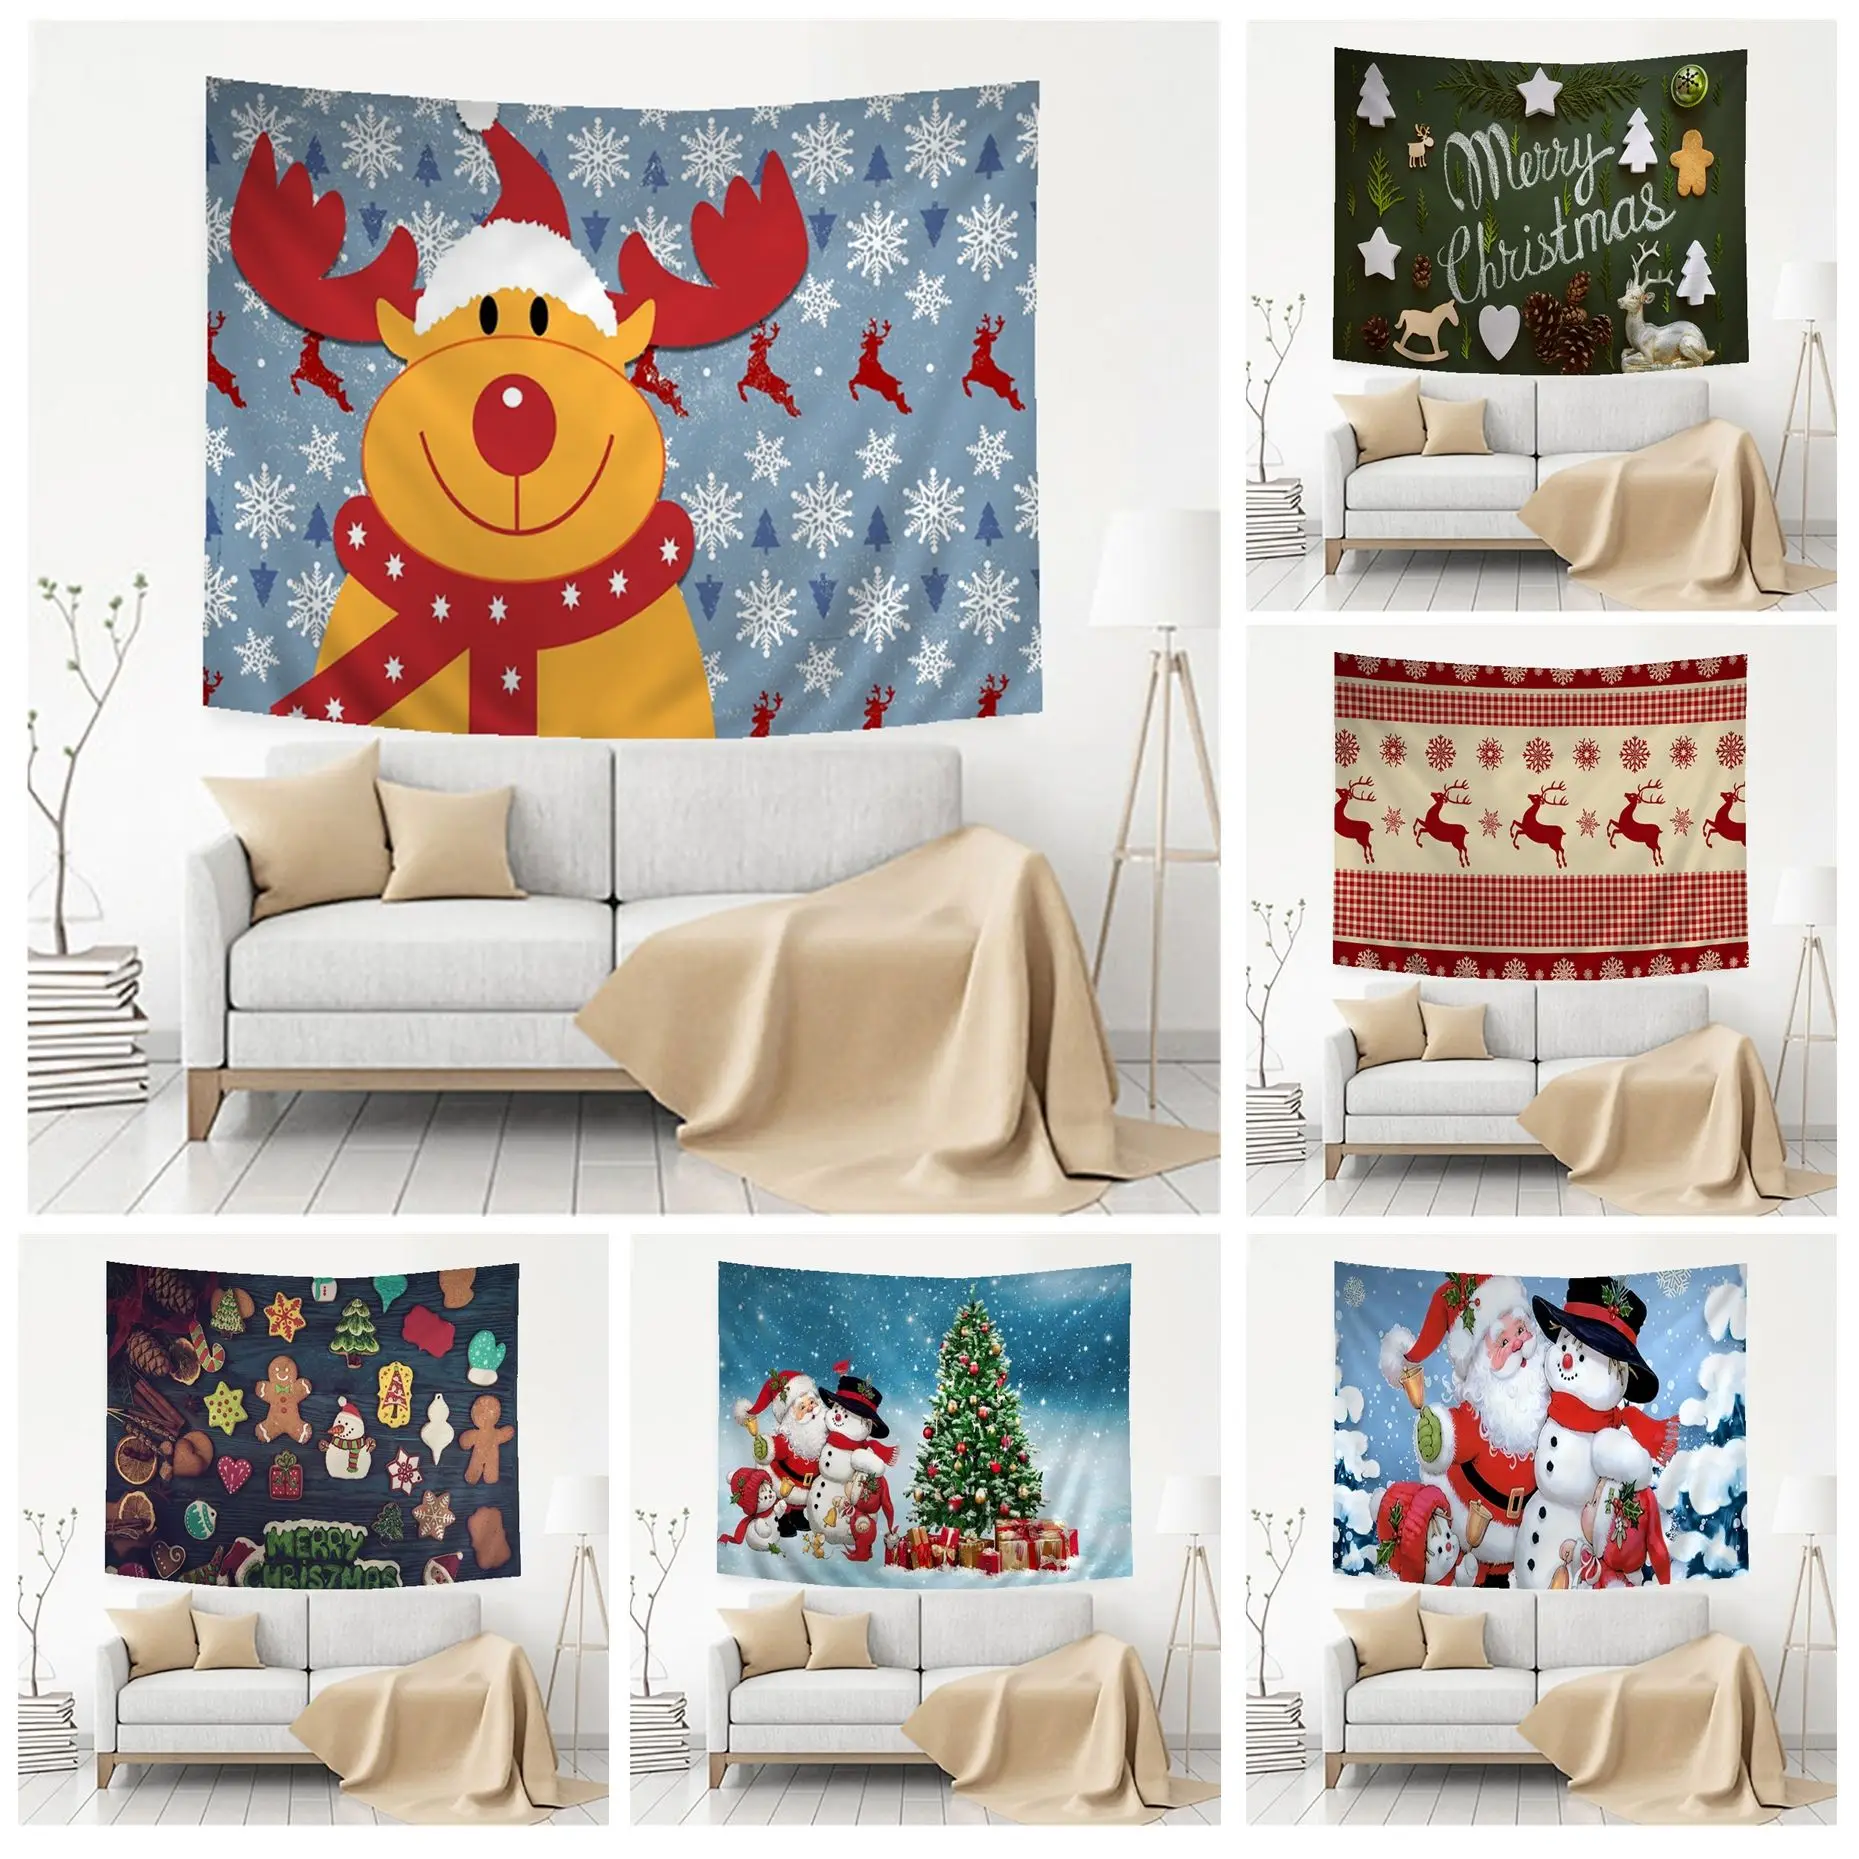 

Merry Christmas Hippie Wall Hanging Tapestries Hanging Tarot Hippie Wall Rugs Dorm Decor Blanket